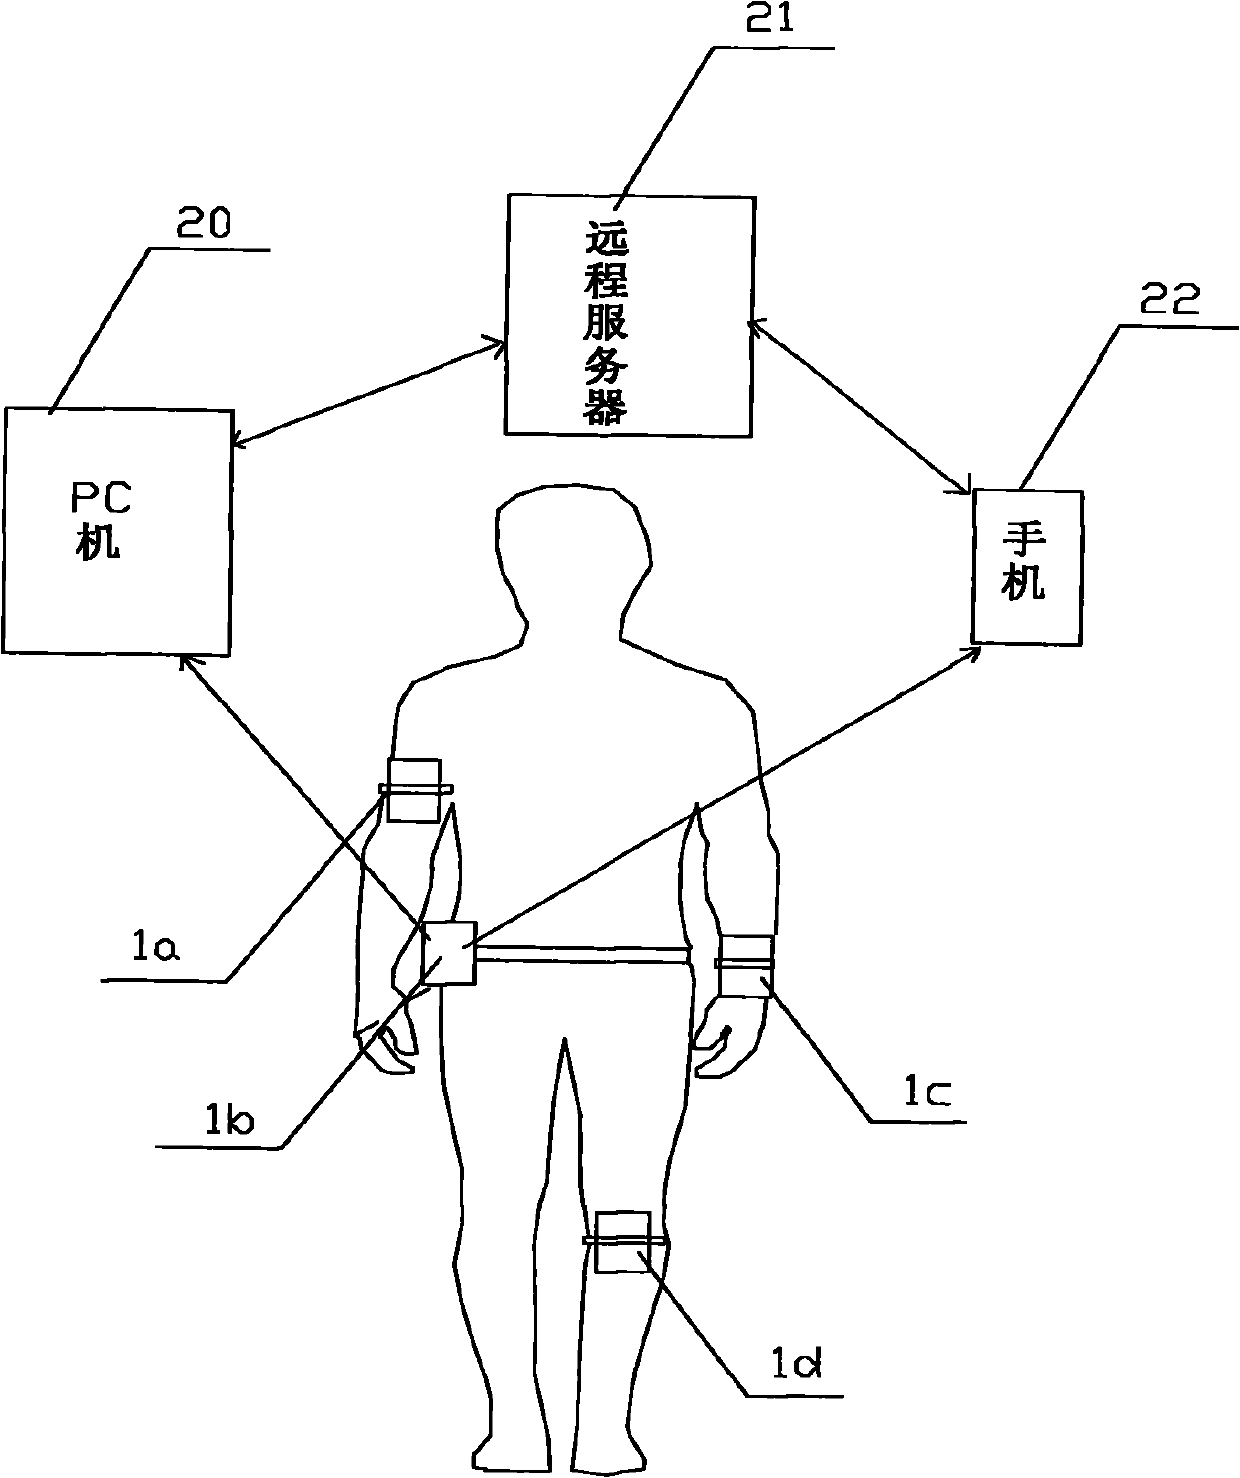 Method for safely transmitting physical activity monitoring data